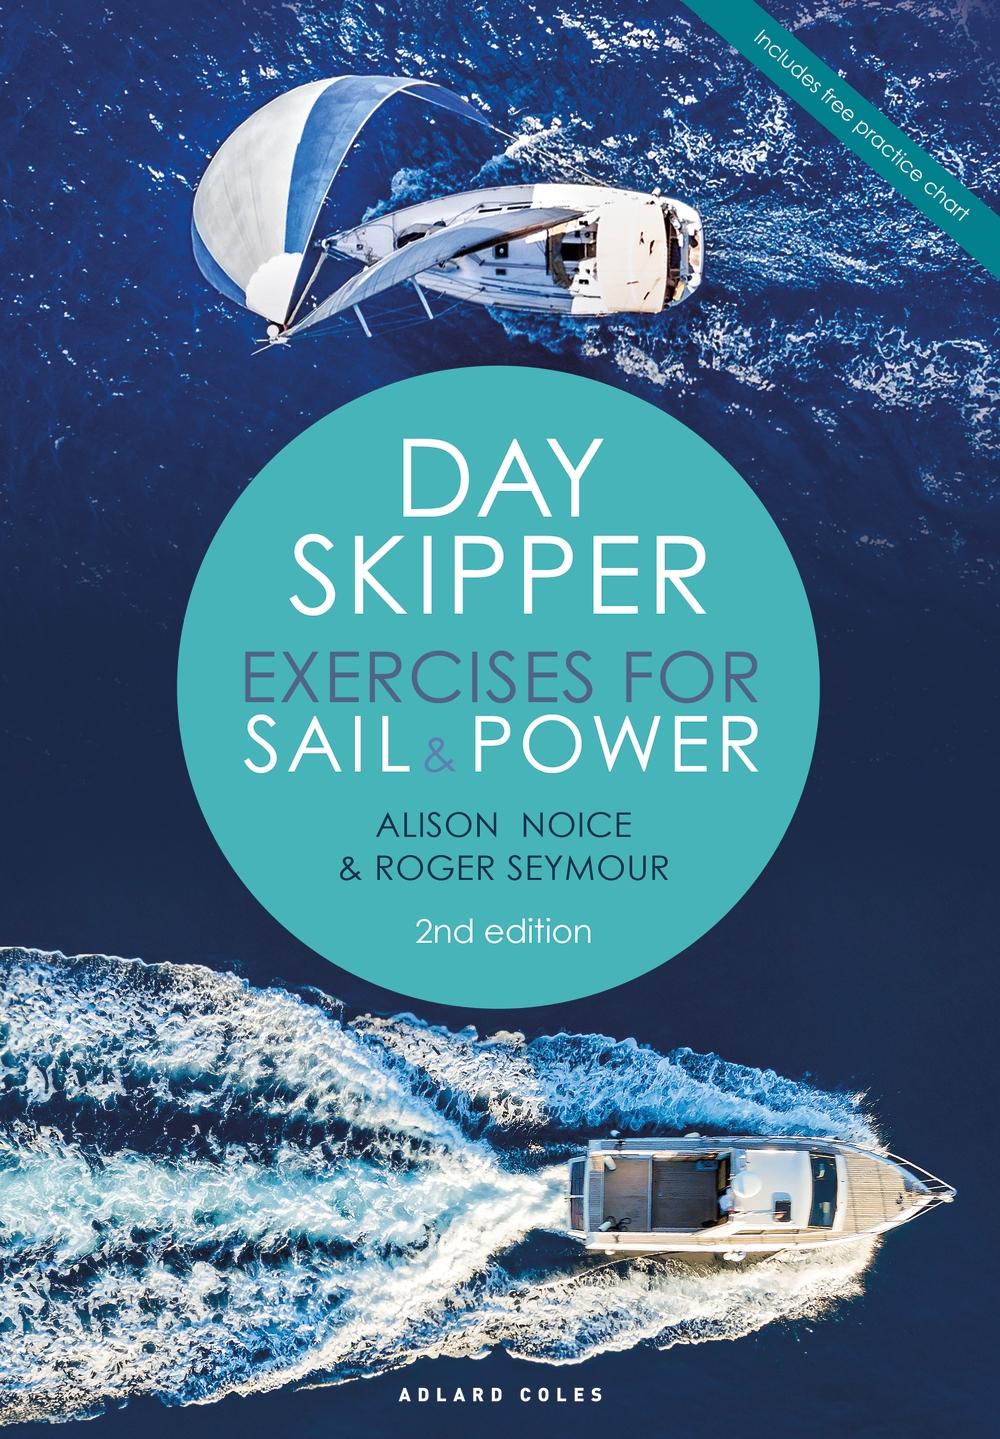 Day Skipper Exercises for Sail and Power - Roger Seymour